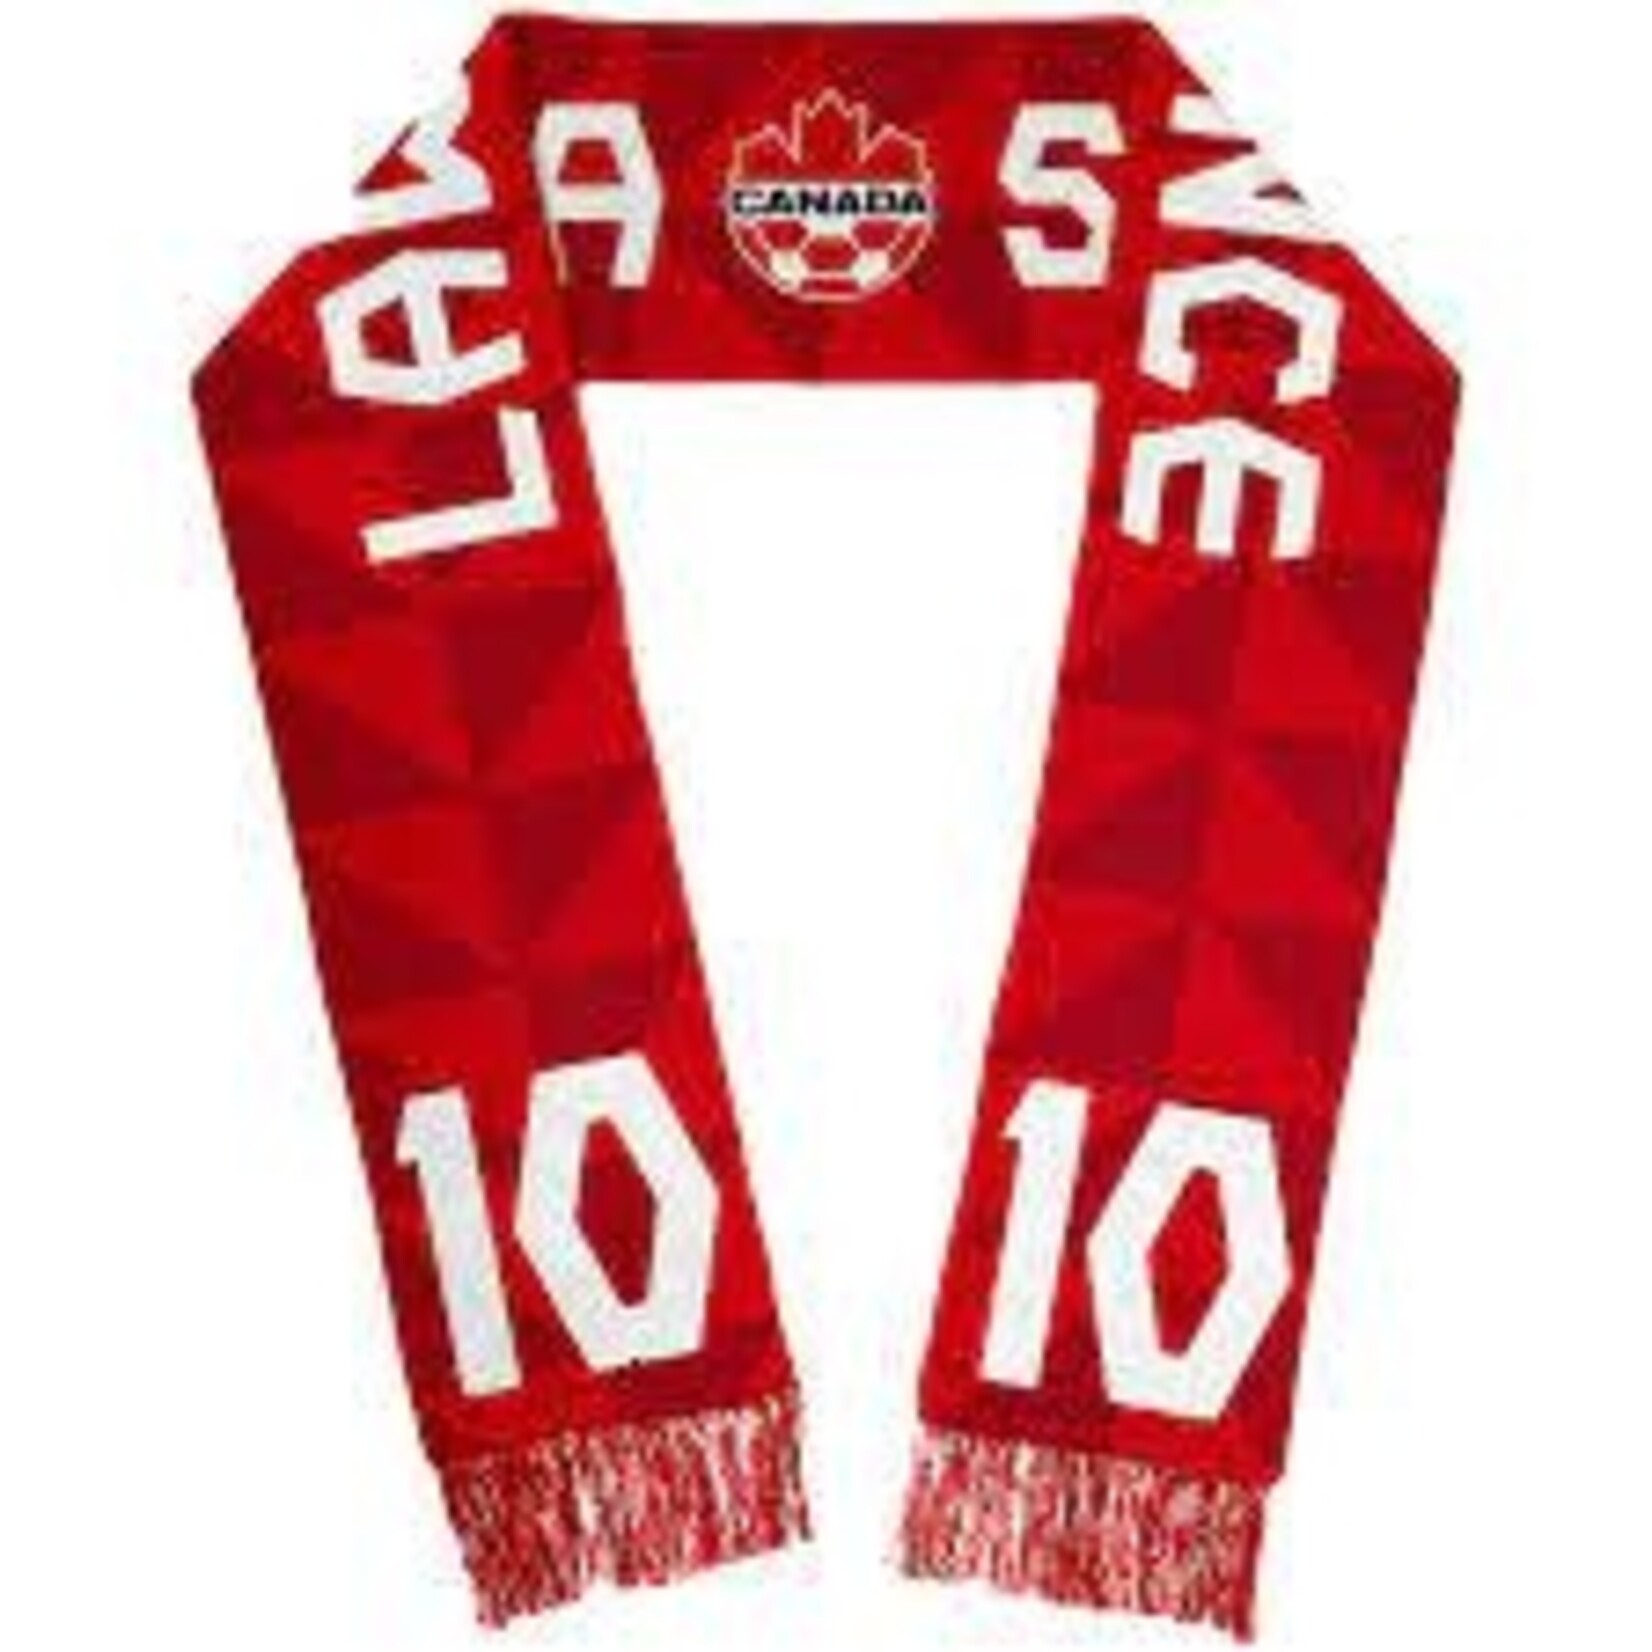 Nike Canada Number 10 Scarf